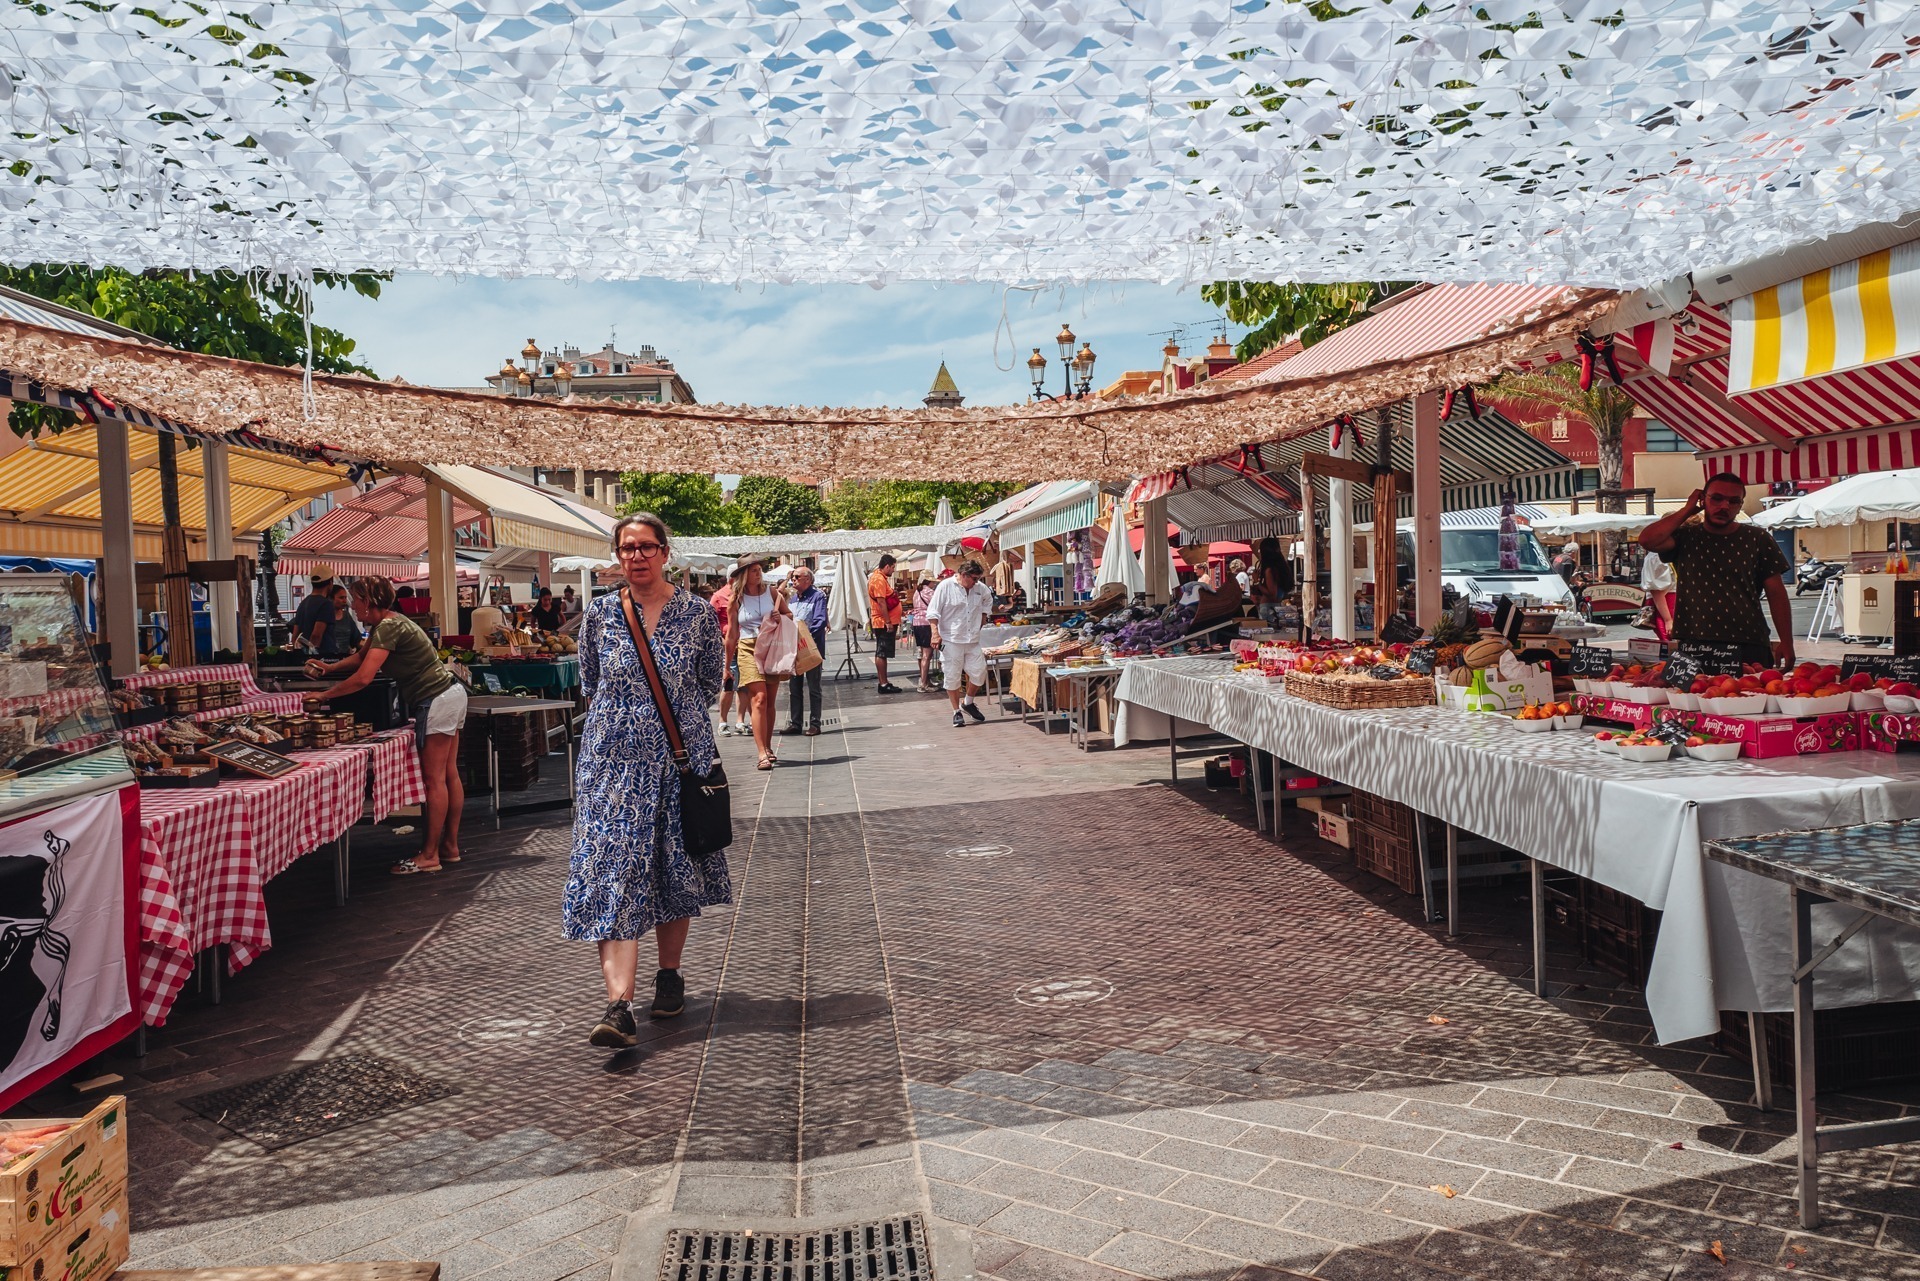 Nice, France-June 2022: the famous flower market in the old city